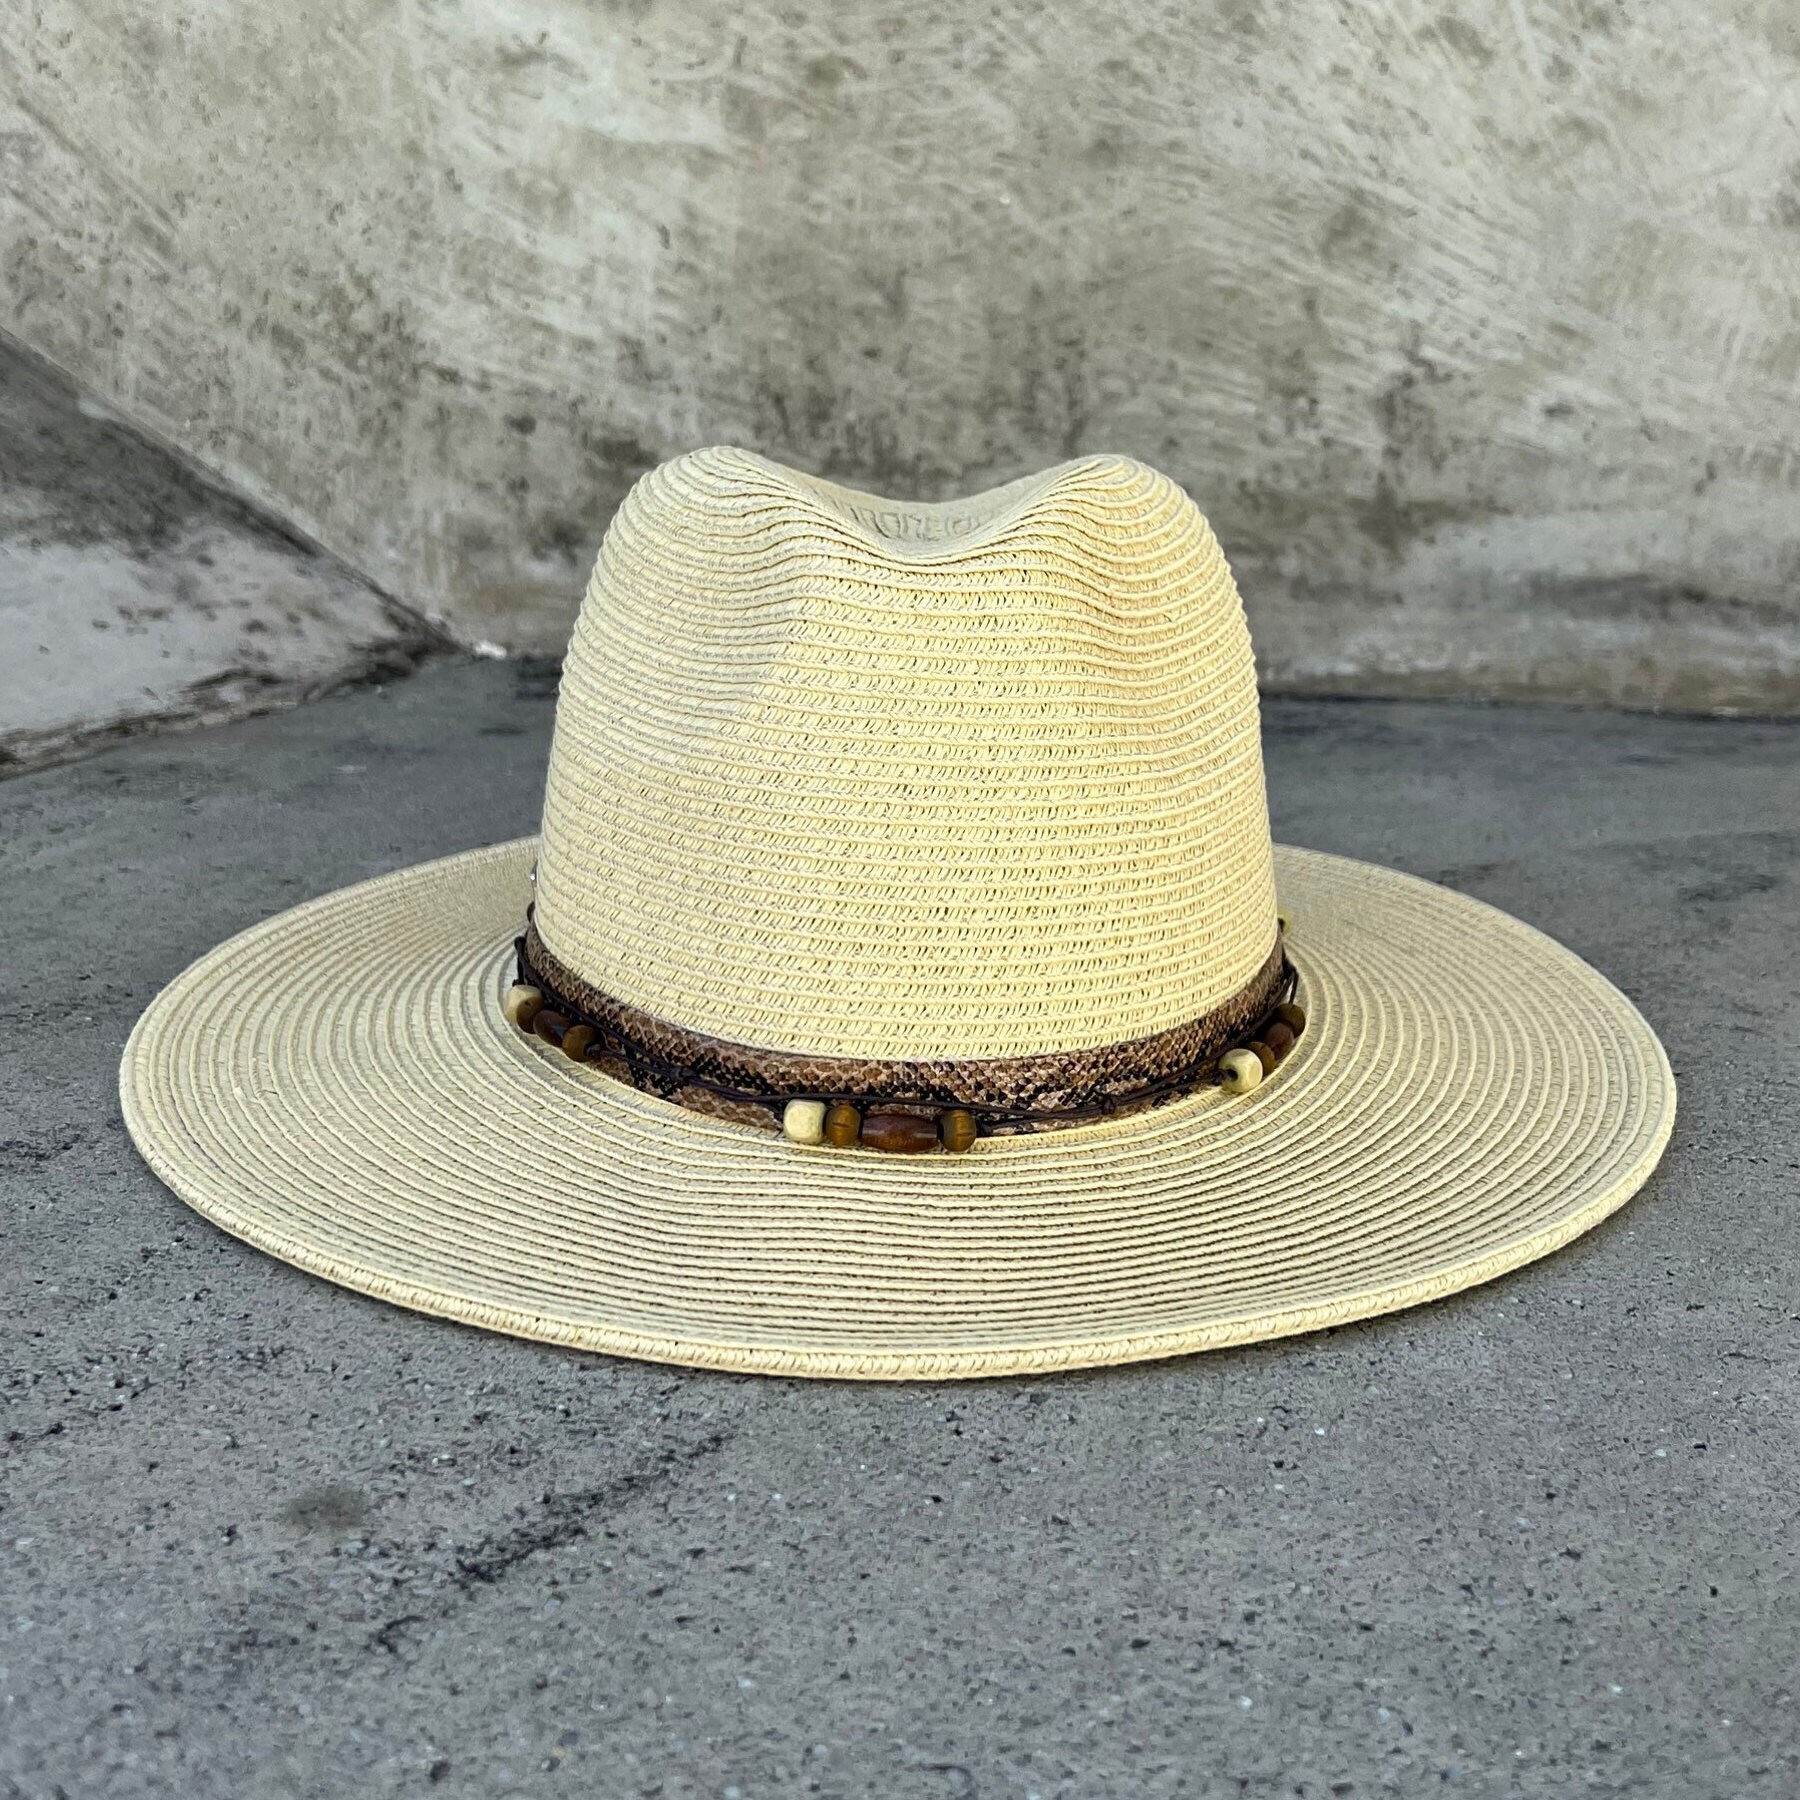 Wide Brim Hat, Sun Hat, Summer Hat, Snakeskin Print and Beads Band, Beach  Hat, Foldable, Packable Hat, Fashion Hat, Women Hat, Hat for Men 